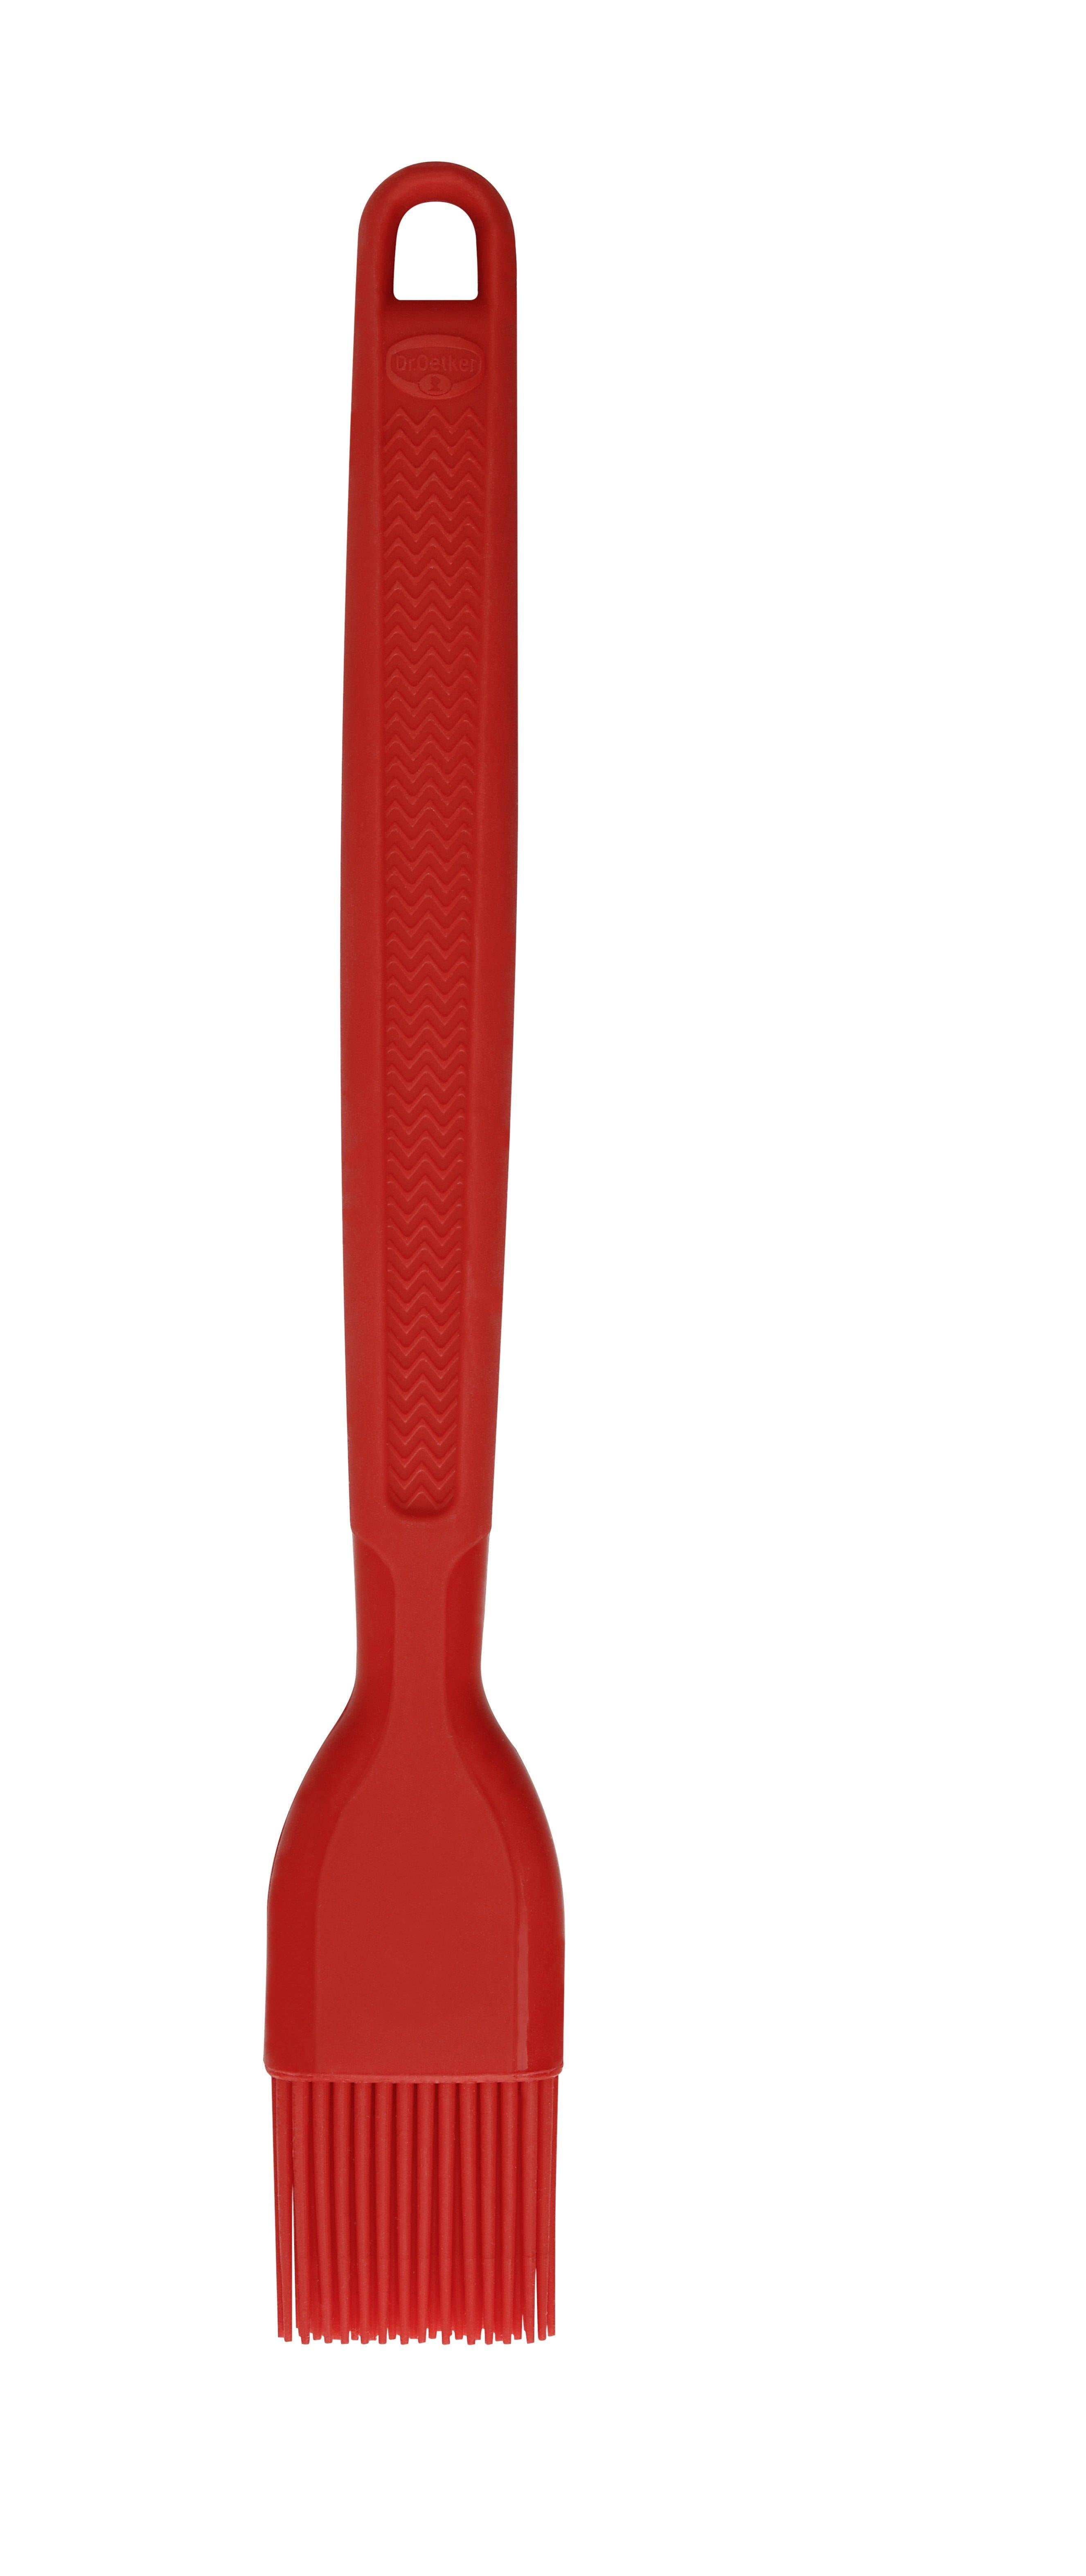 Dr. Oetker "Flexxibel Love" Silicone Pastry Brush Big, Red, 35X250 Mm - Whole and All